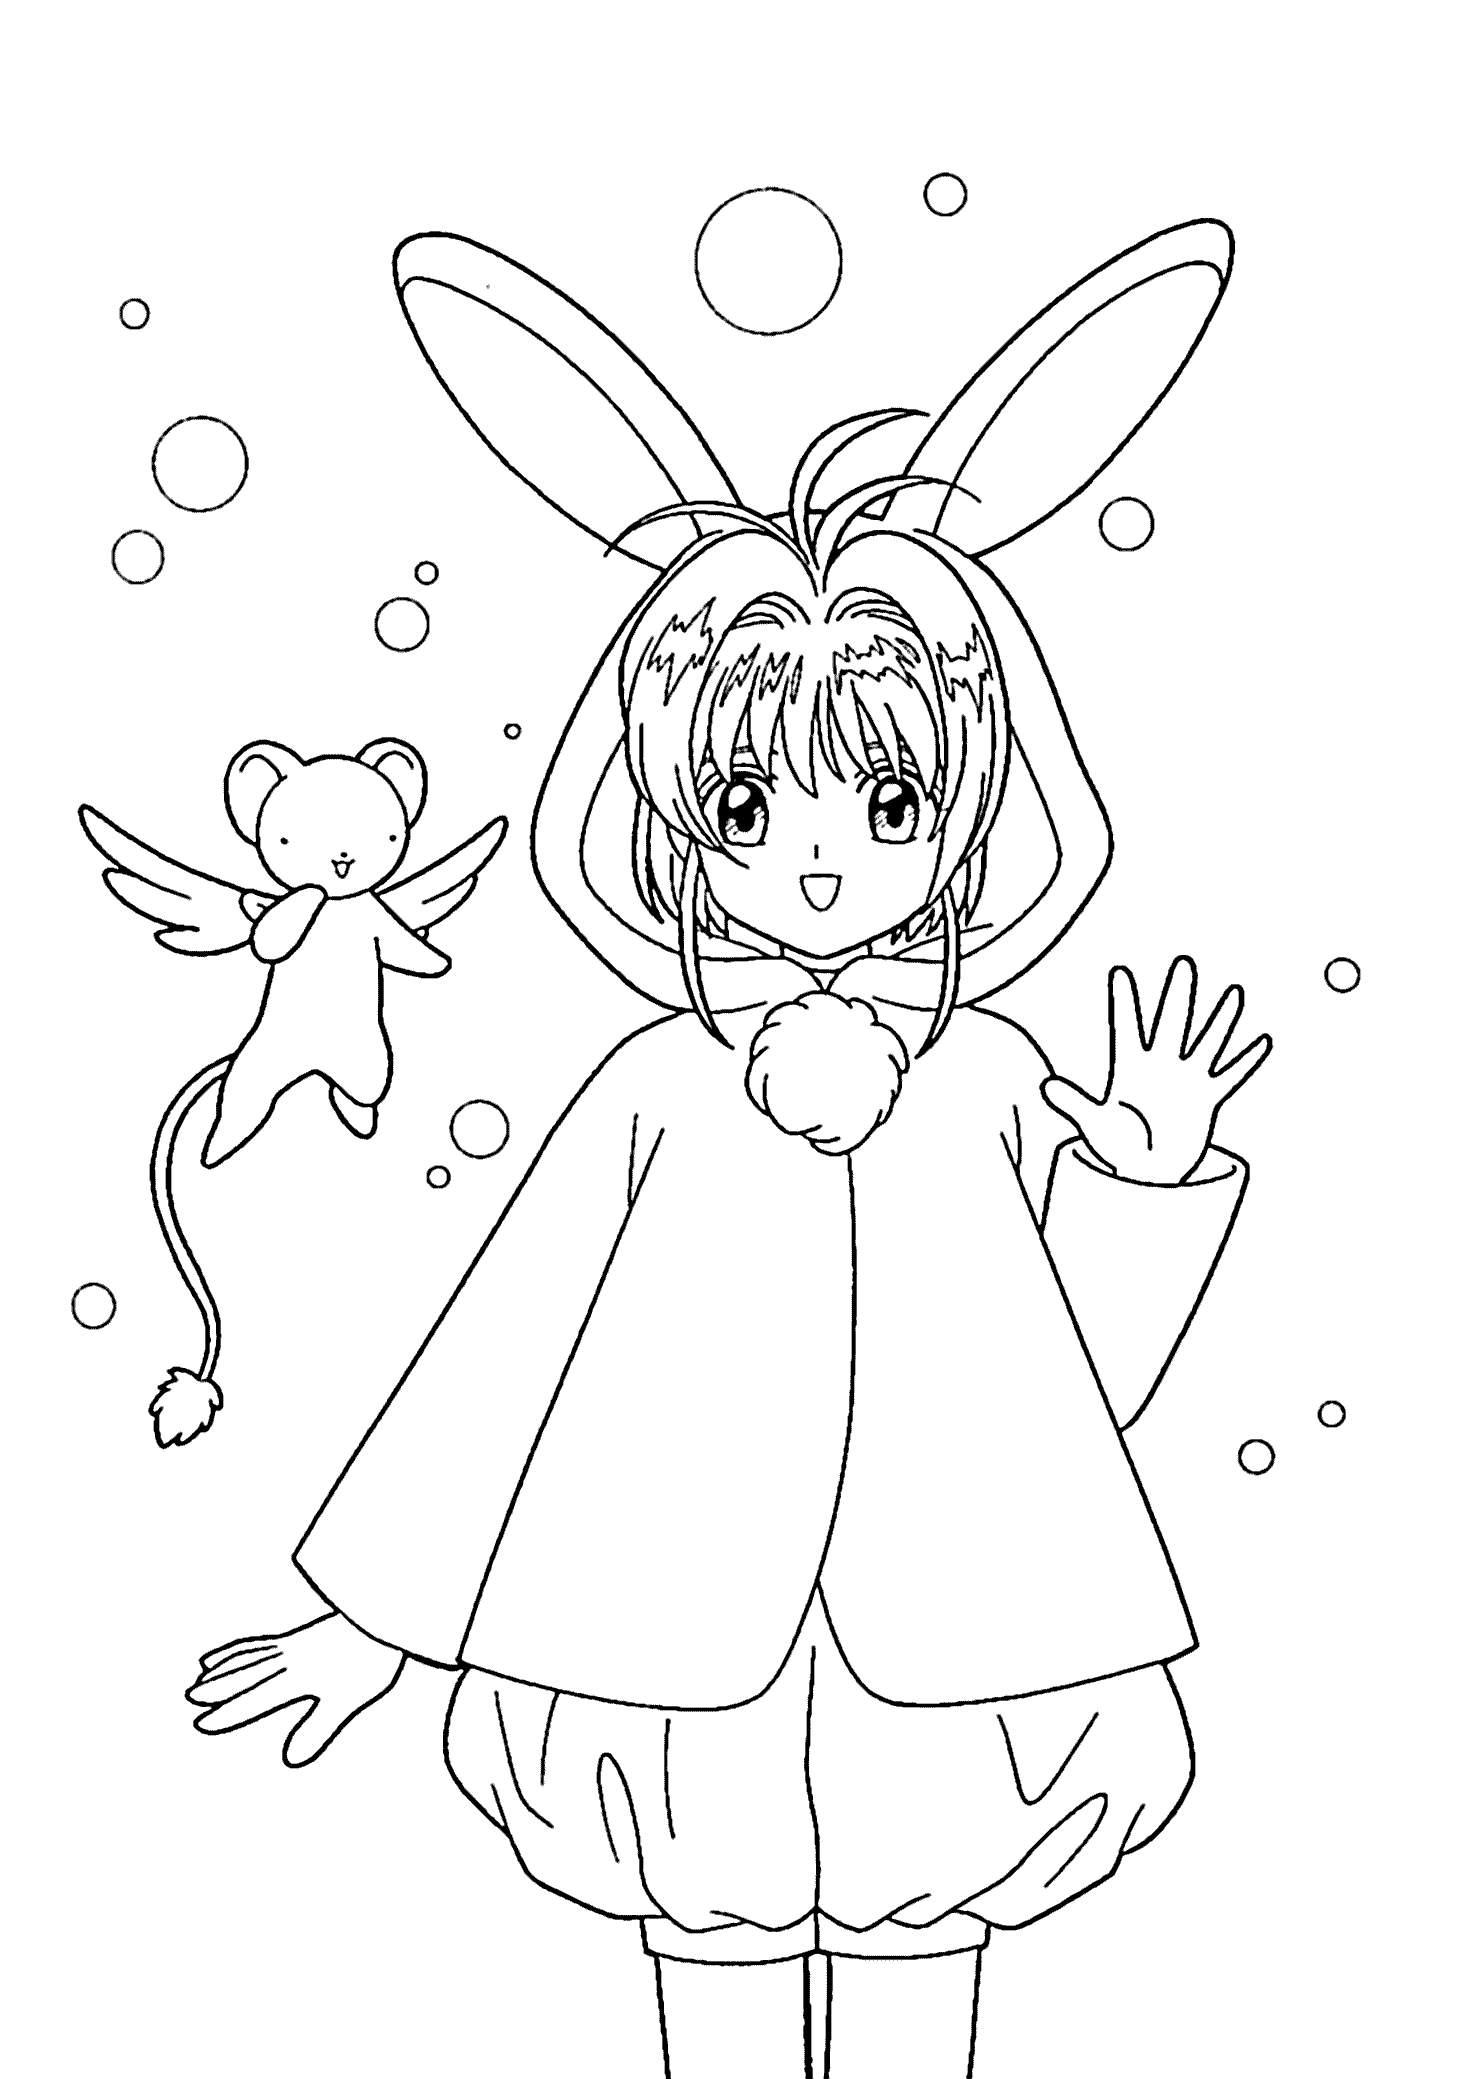 Cardcaptor Sakura Coloring Pages - Best Coloring Pages For Kids